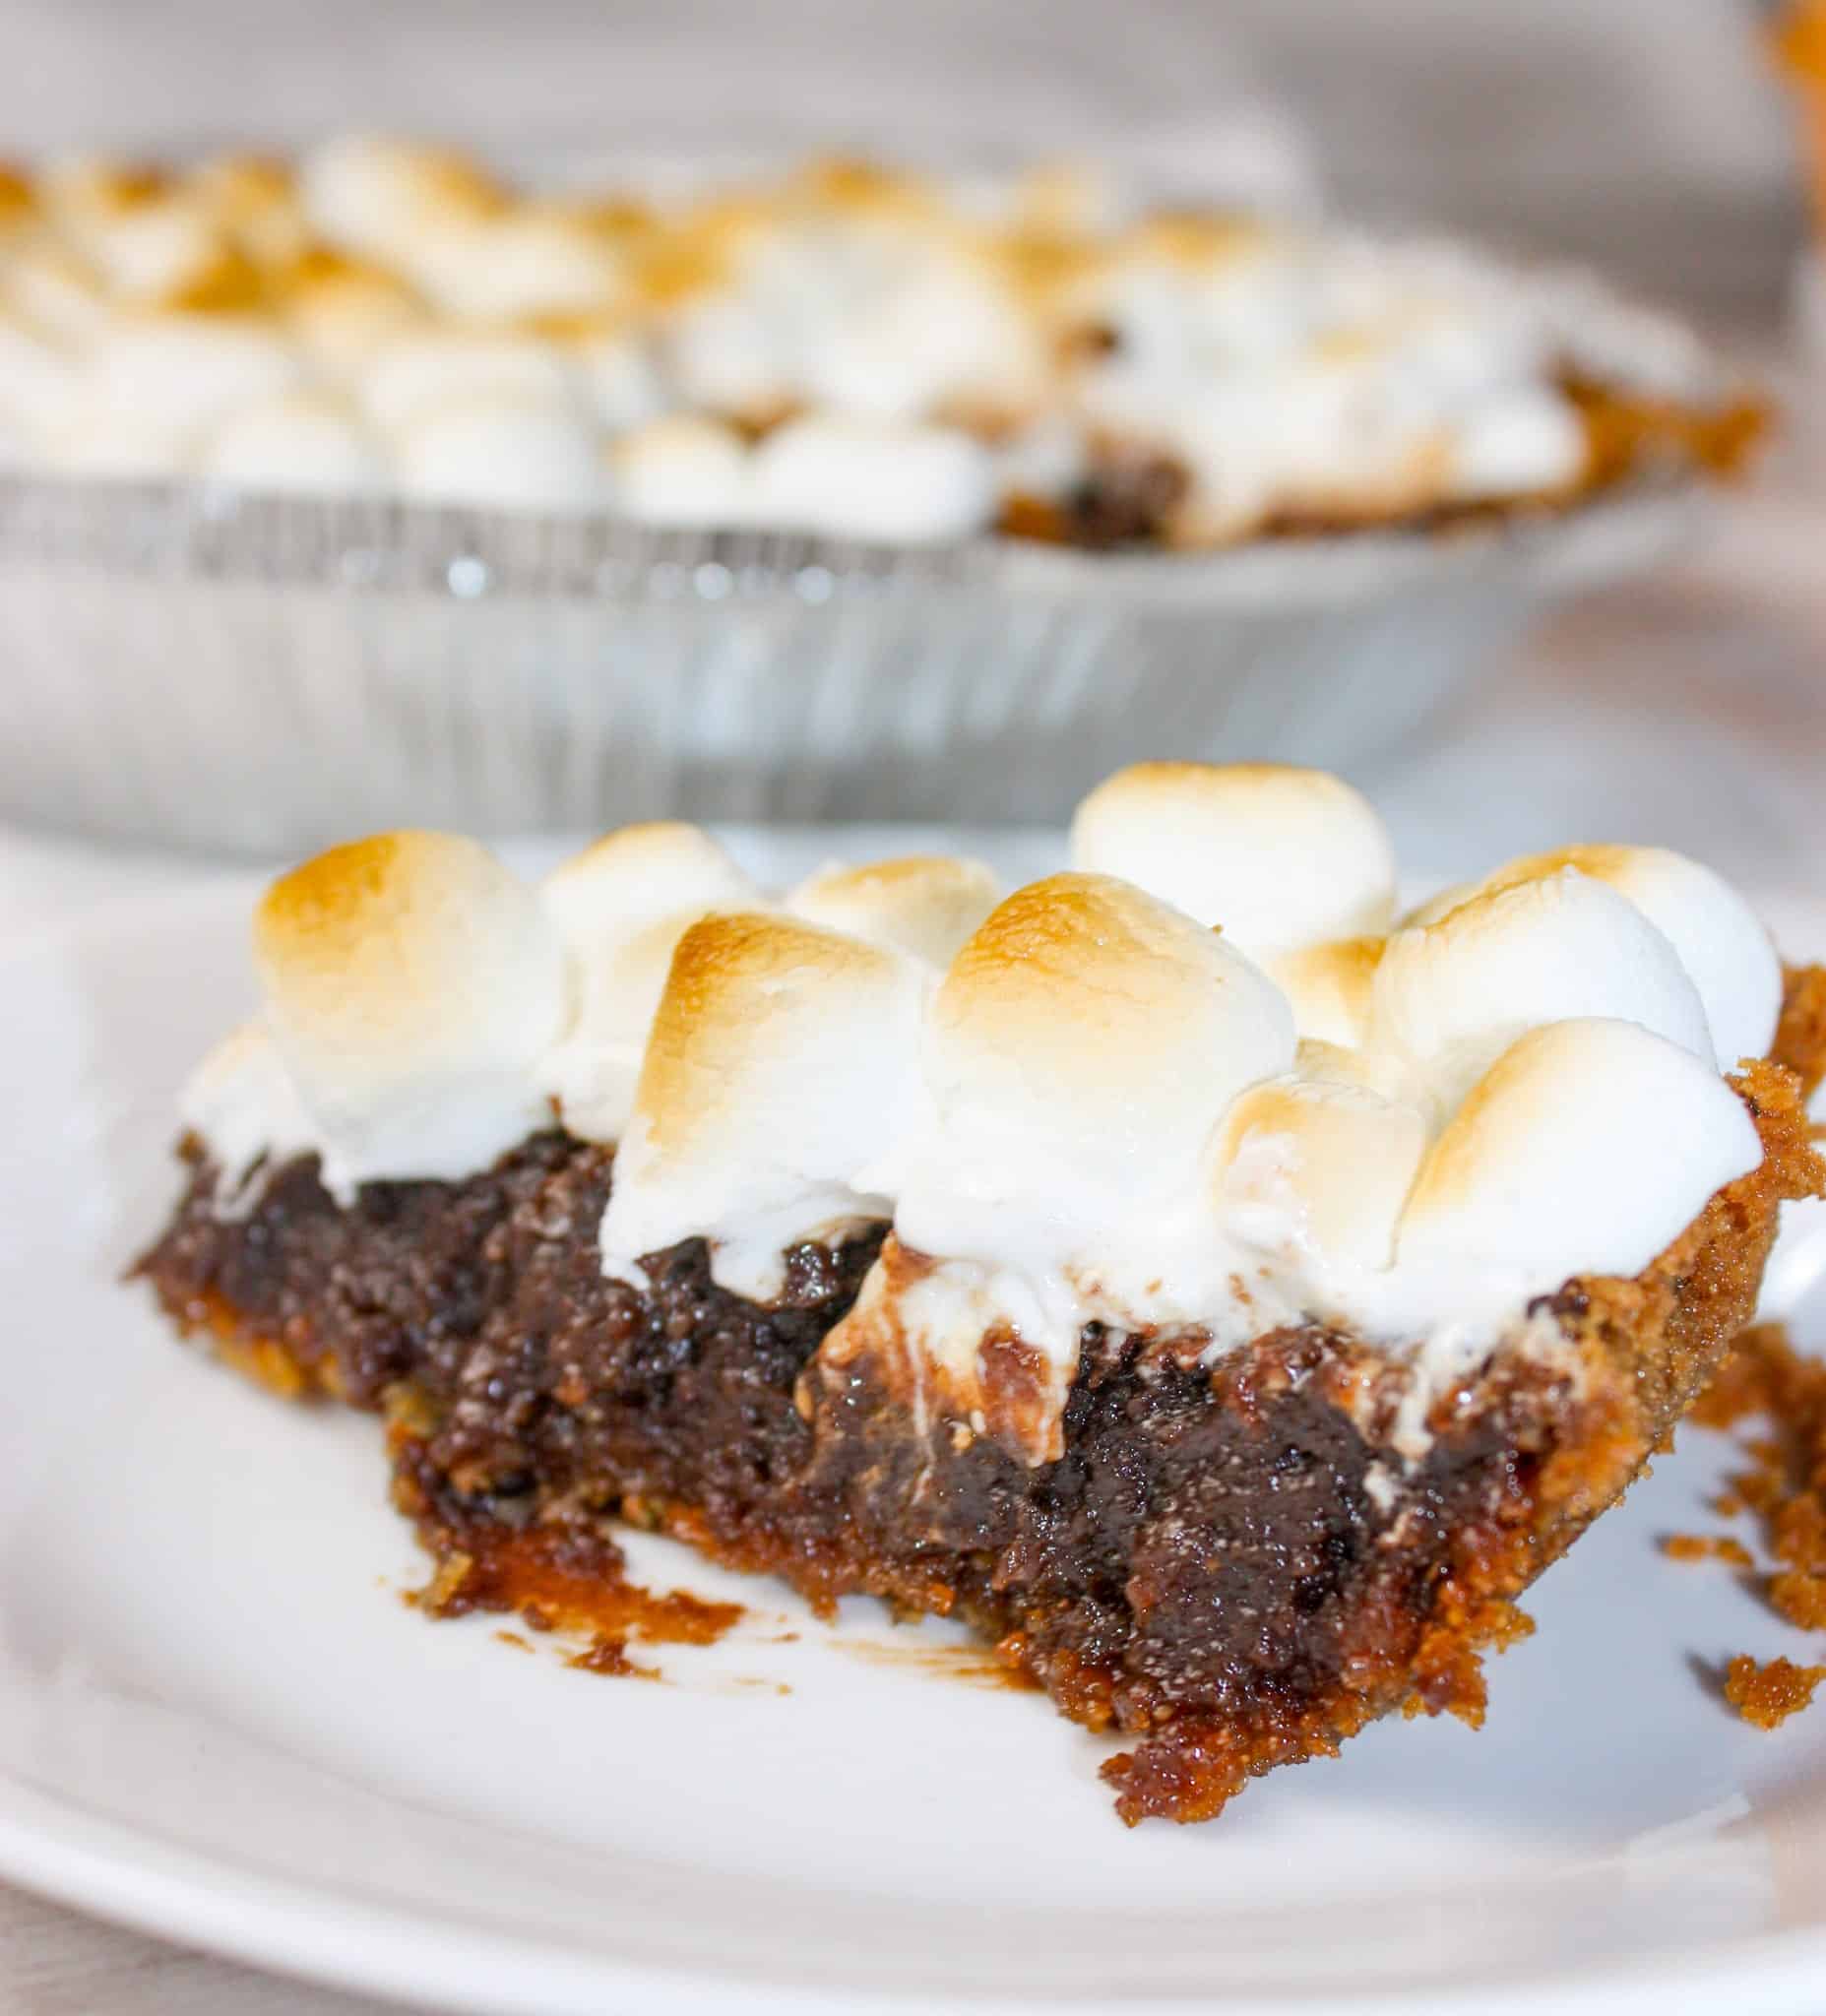 S'mores Pie is a delicious dessert that will delight the taste buds of young and old alike.  